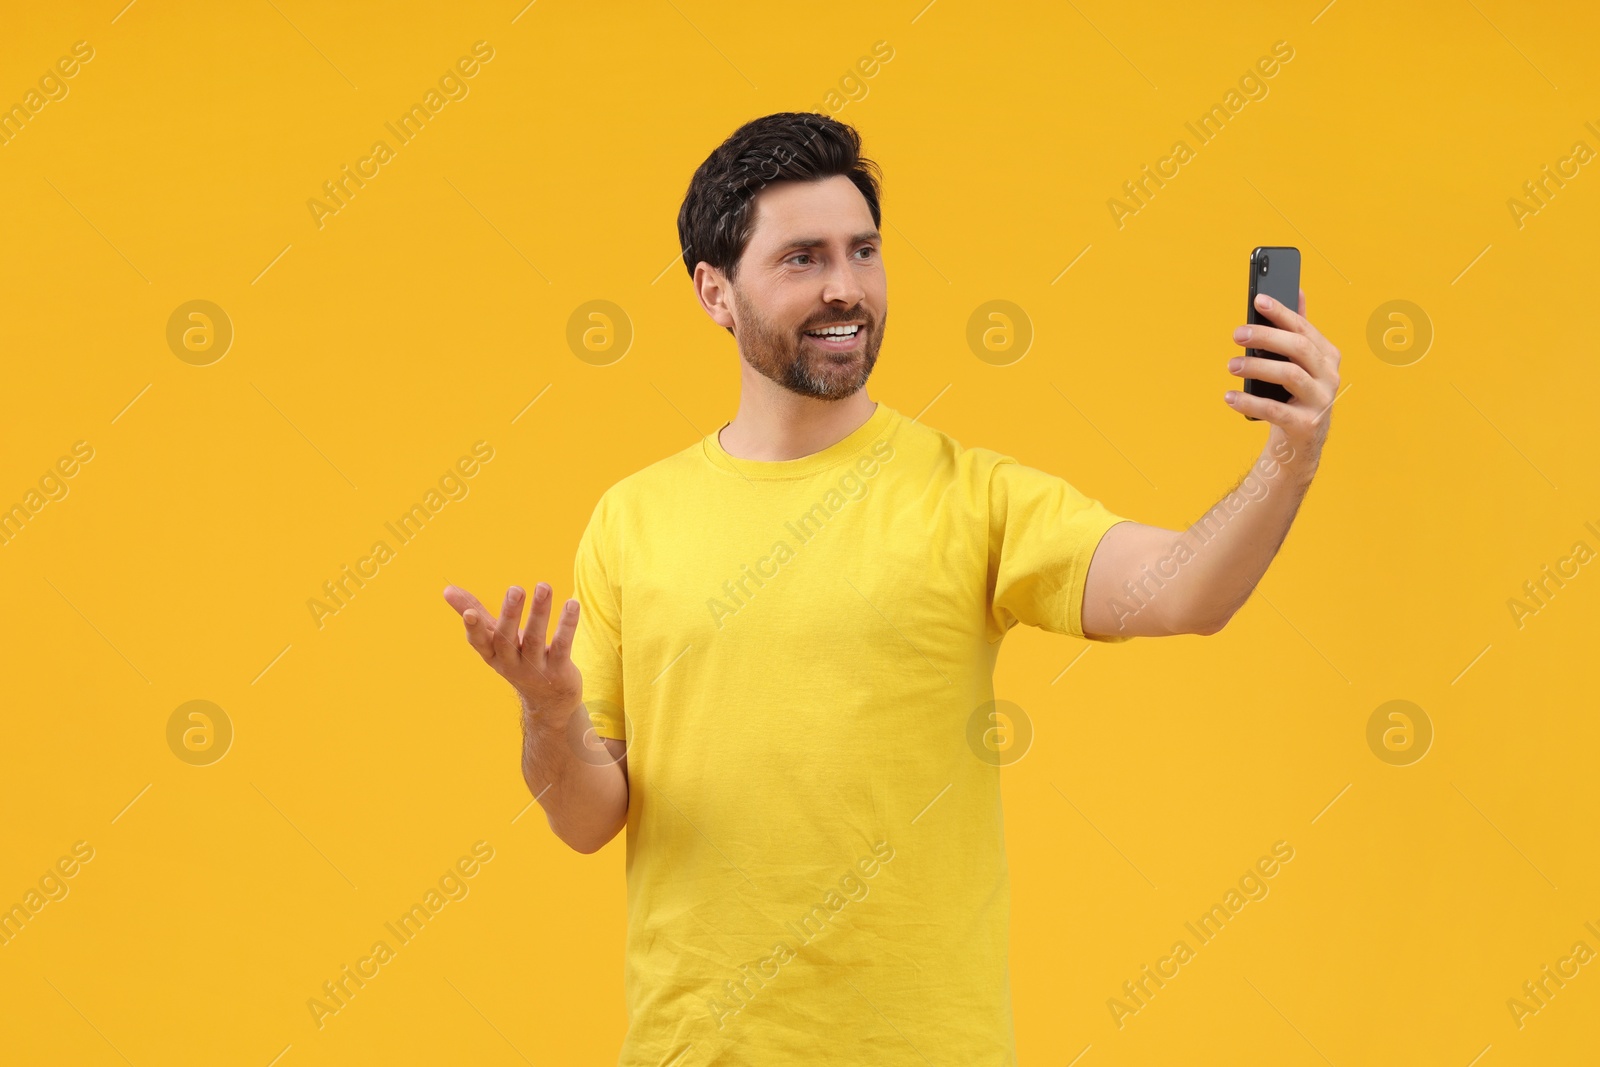 Photo of Smiling man taking selfie with smartphone on yellow background